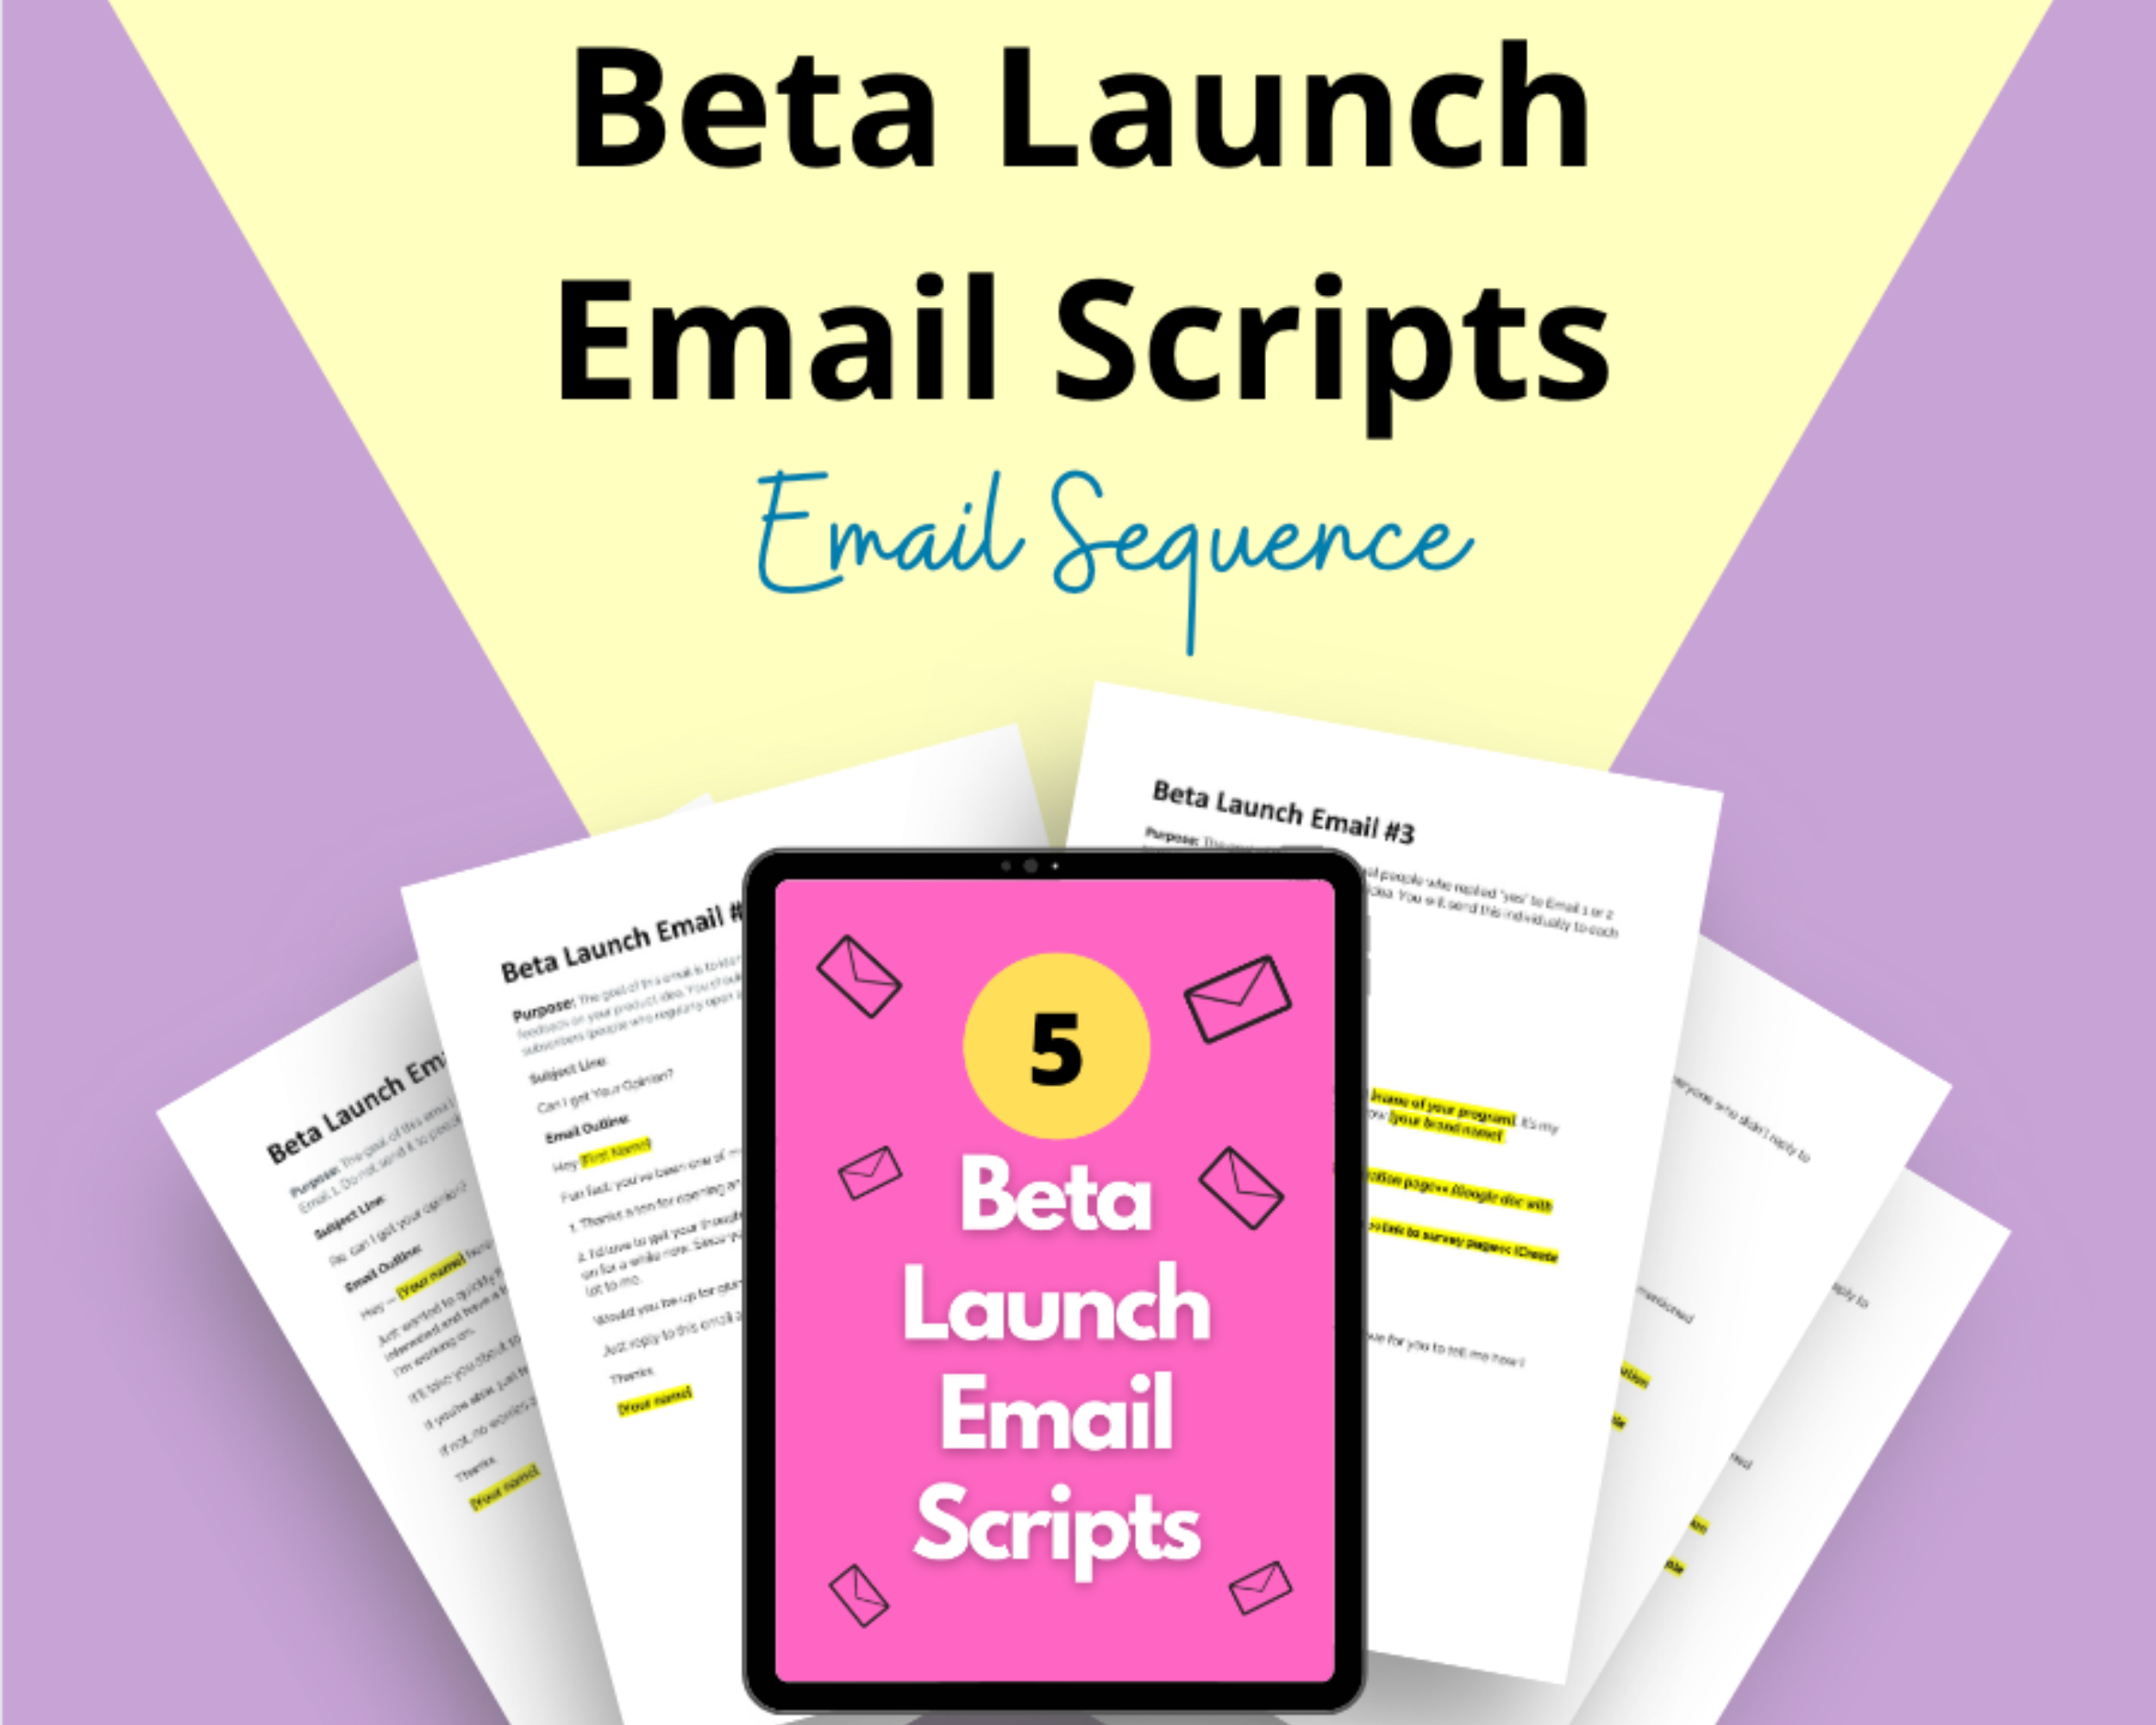 Beta Launch Email Sequence